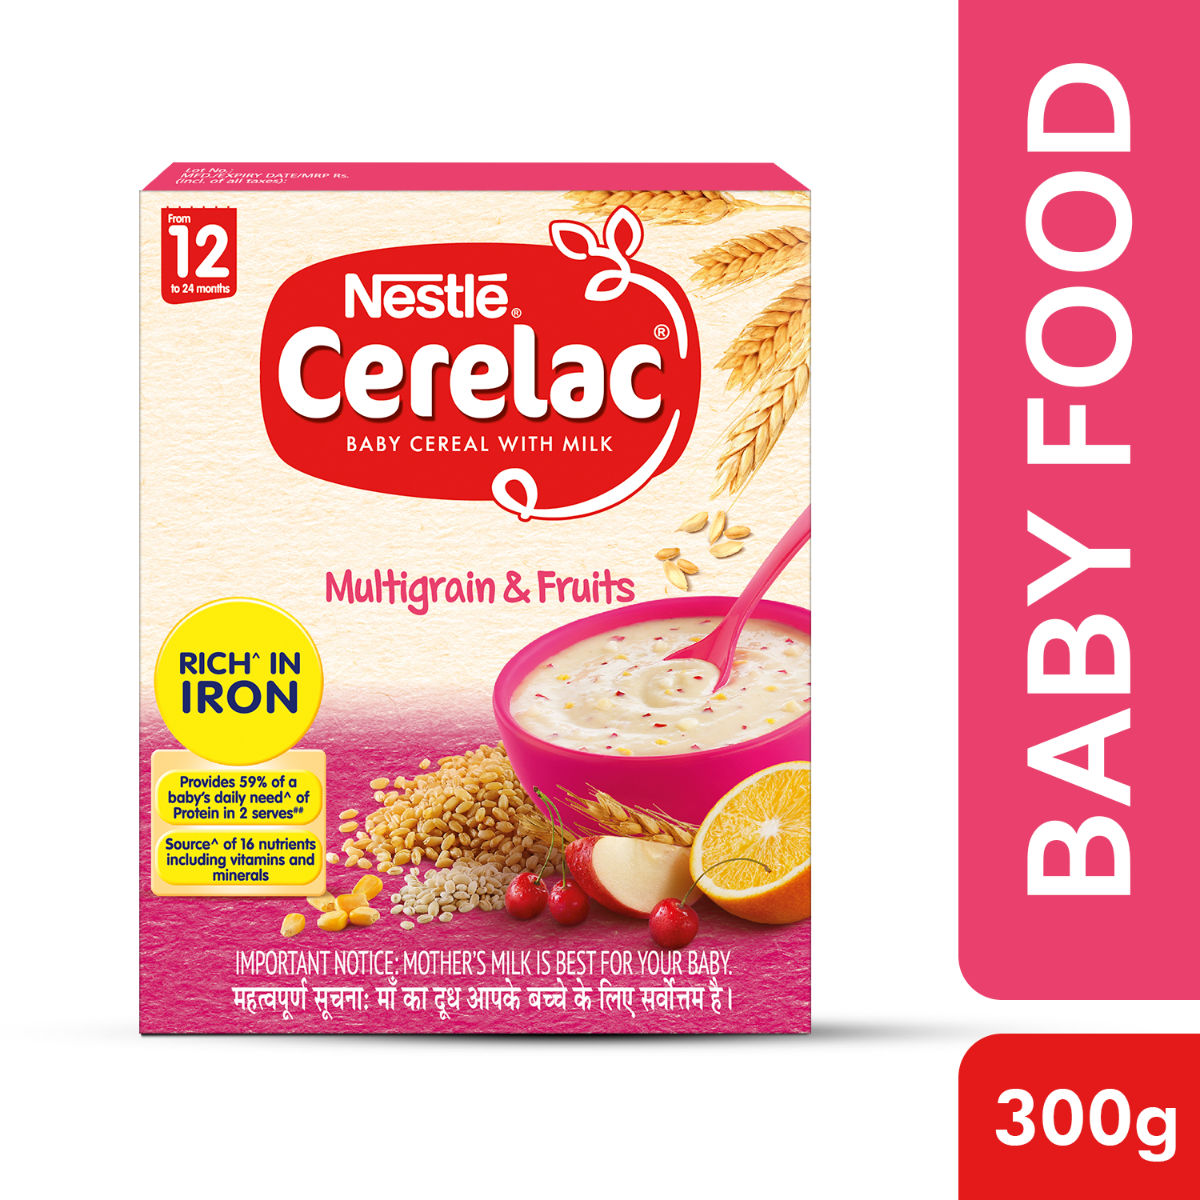 Buy Nestle Cerelac Multigrain & Fruits Baby Cereal, 12 to 24 Months, 300 gm Refill Pack Online